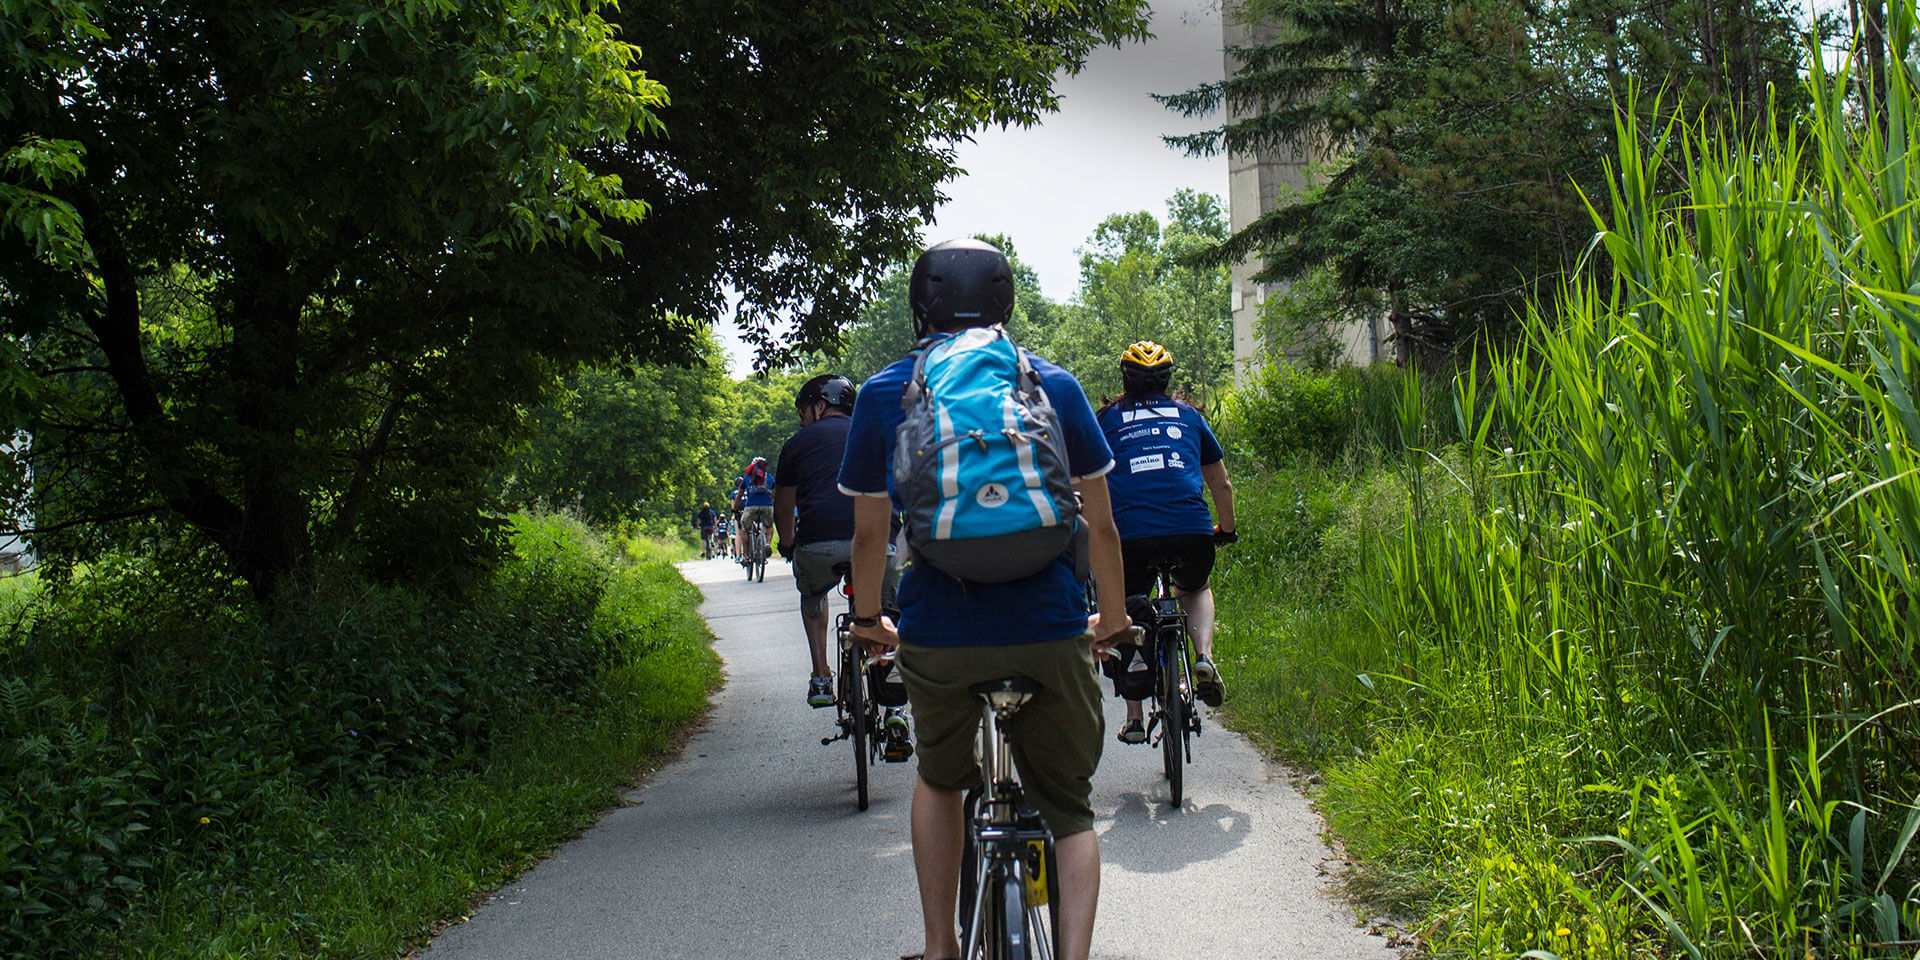 Group bikes along trail in summer 